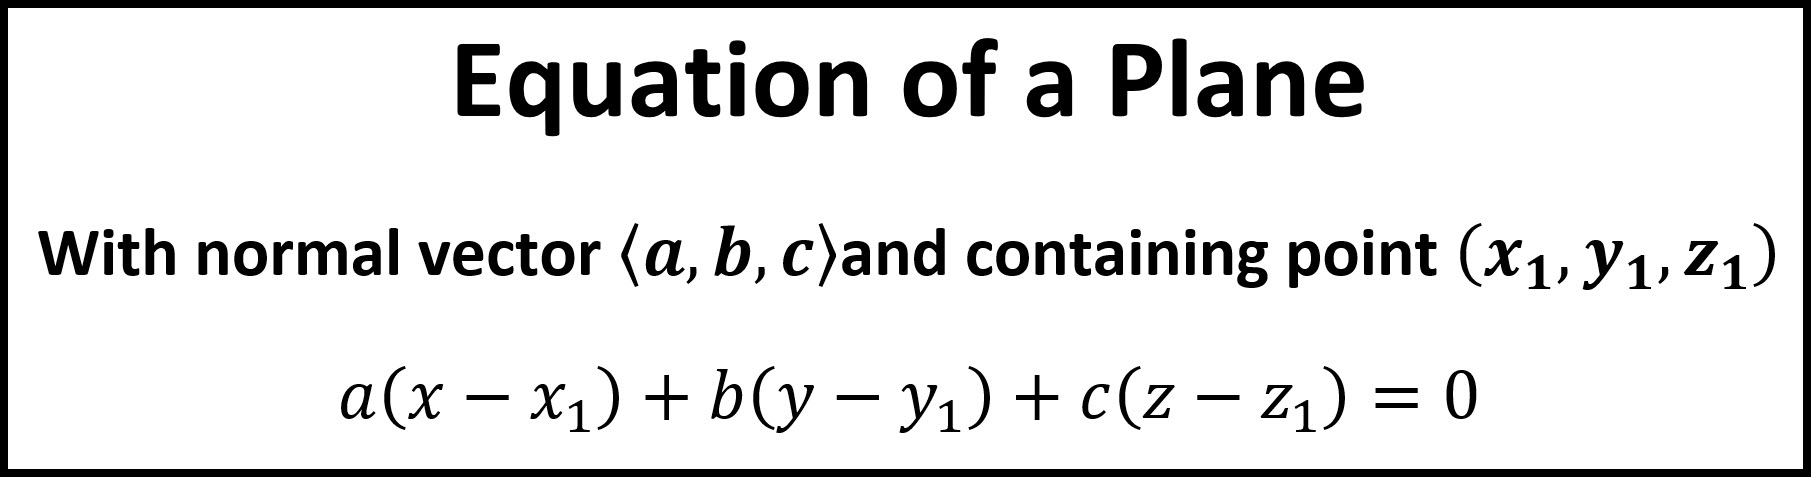 Notes for Equation of a Plane Given a Normal Vector